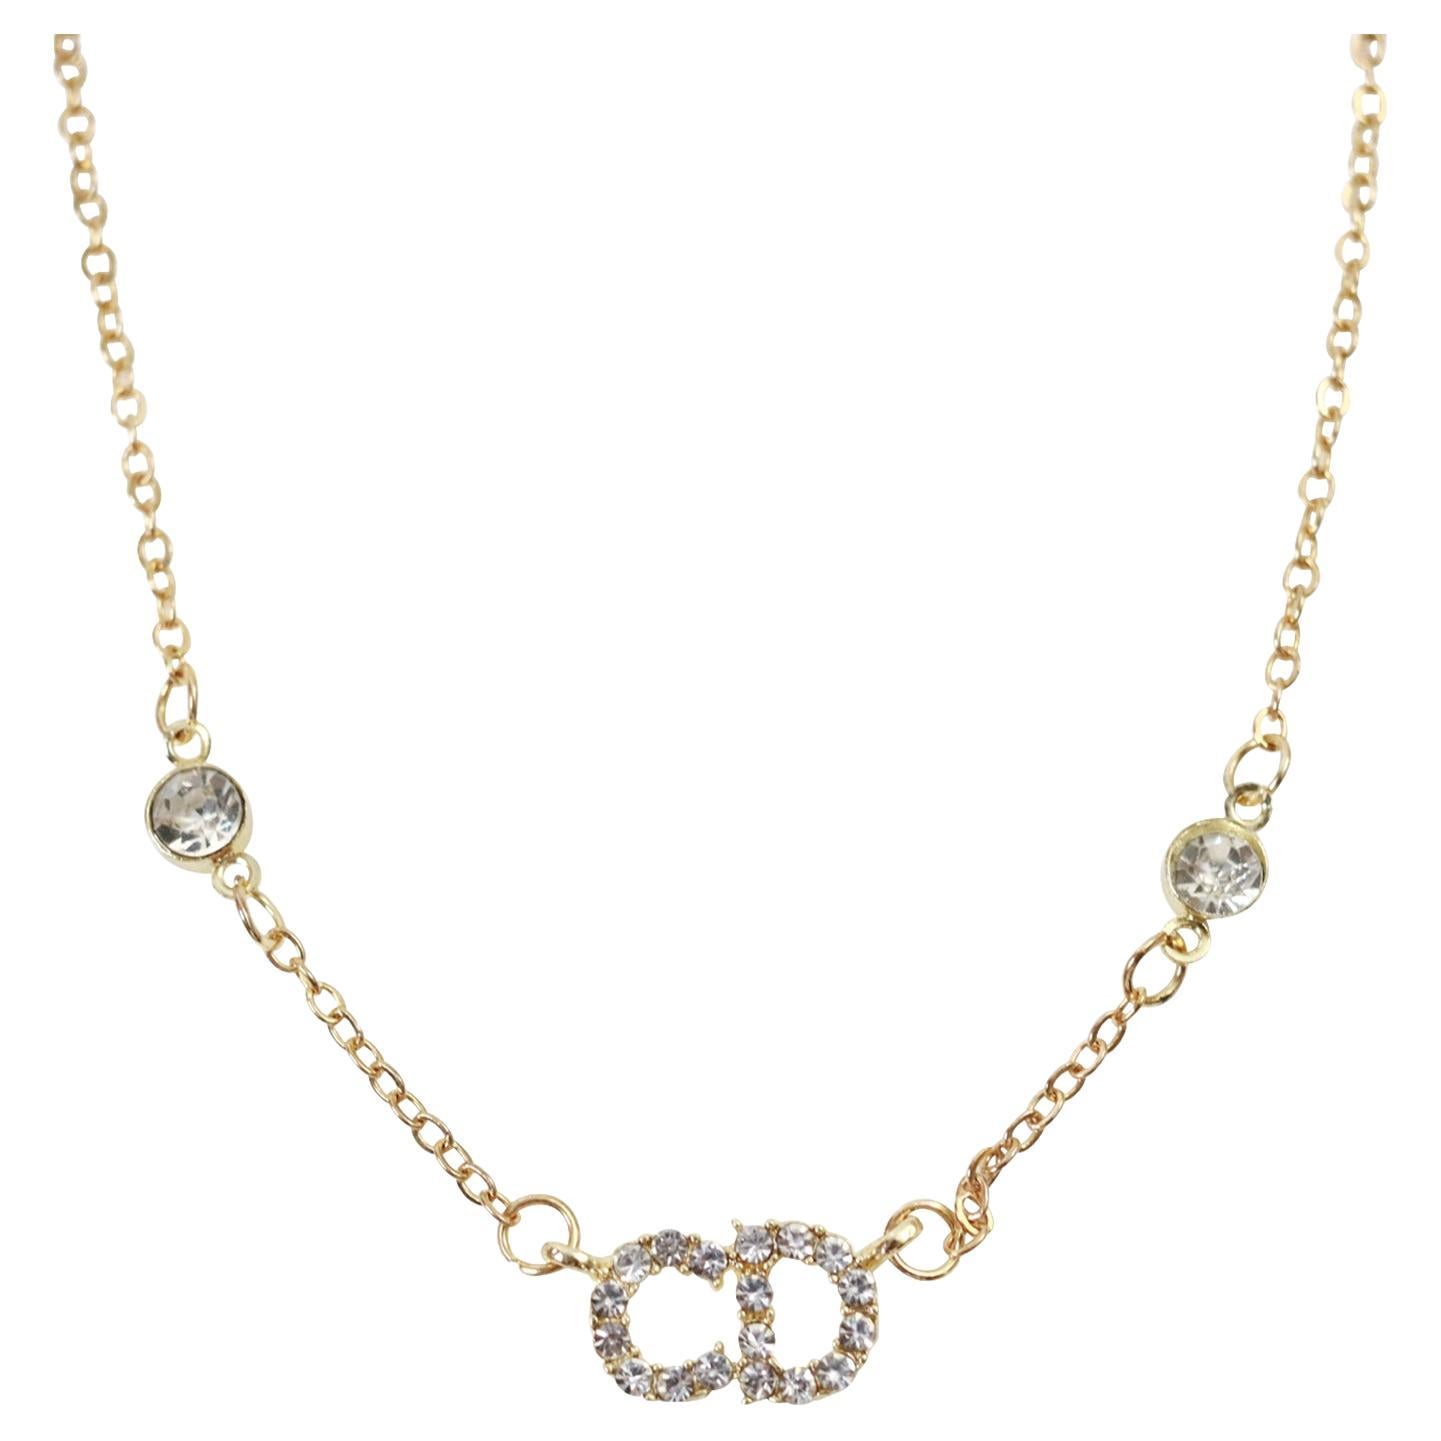 Shop Christian Dior CLAIR D LUNE Clair d lune necklace (N0717CDLCY) by  LittleBabaLondon | BUYMA